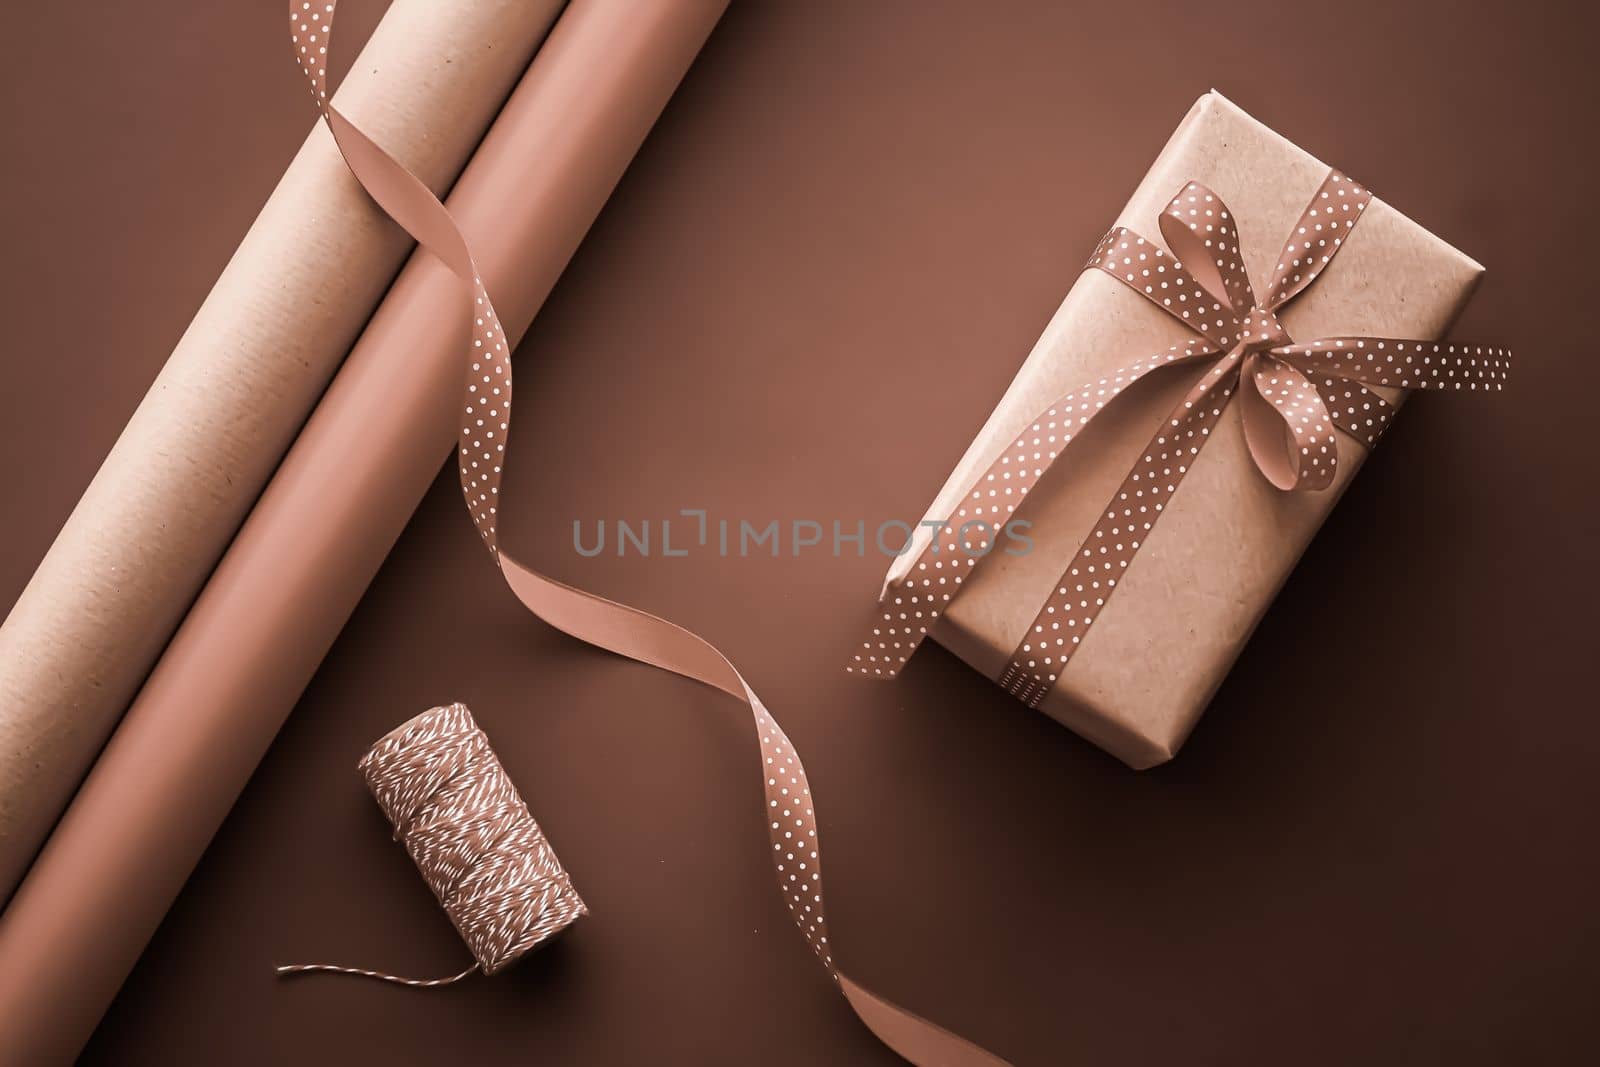 Gifts preparation, birthday and holidays gift giving, craft paper and ribbons for gift boxes on chocolate background as wrapping tools and decorations, diy presents as holiday flat lay design.